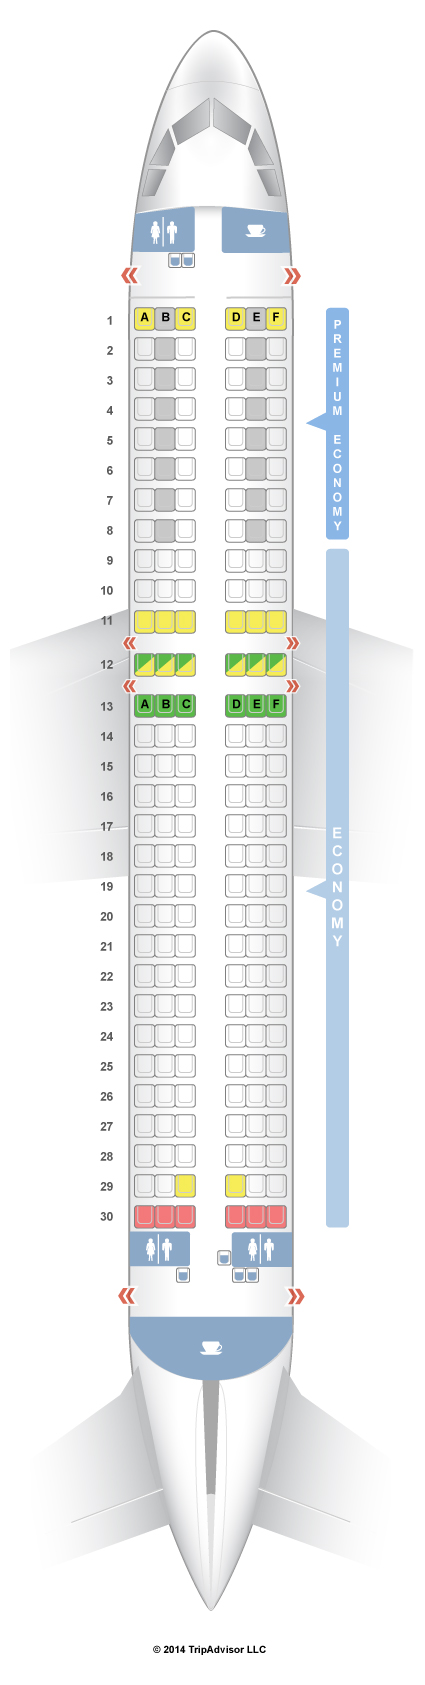 Condor Airlines Seating Chart